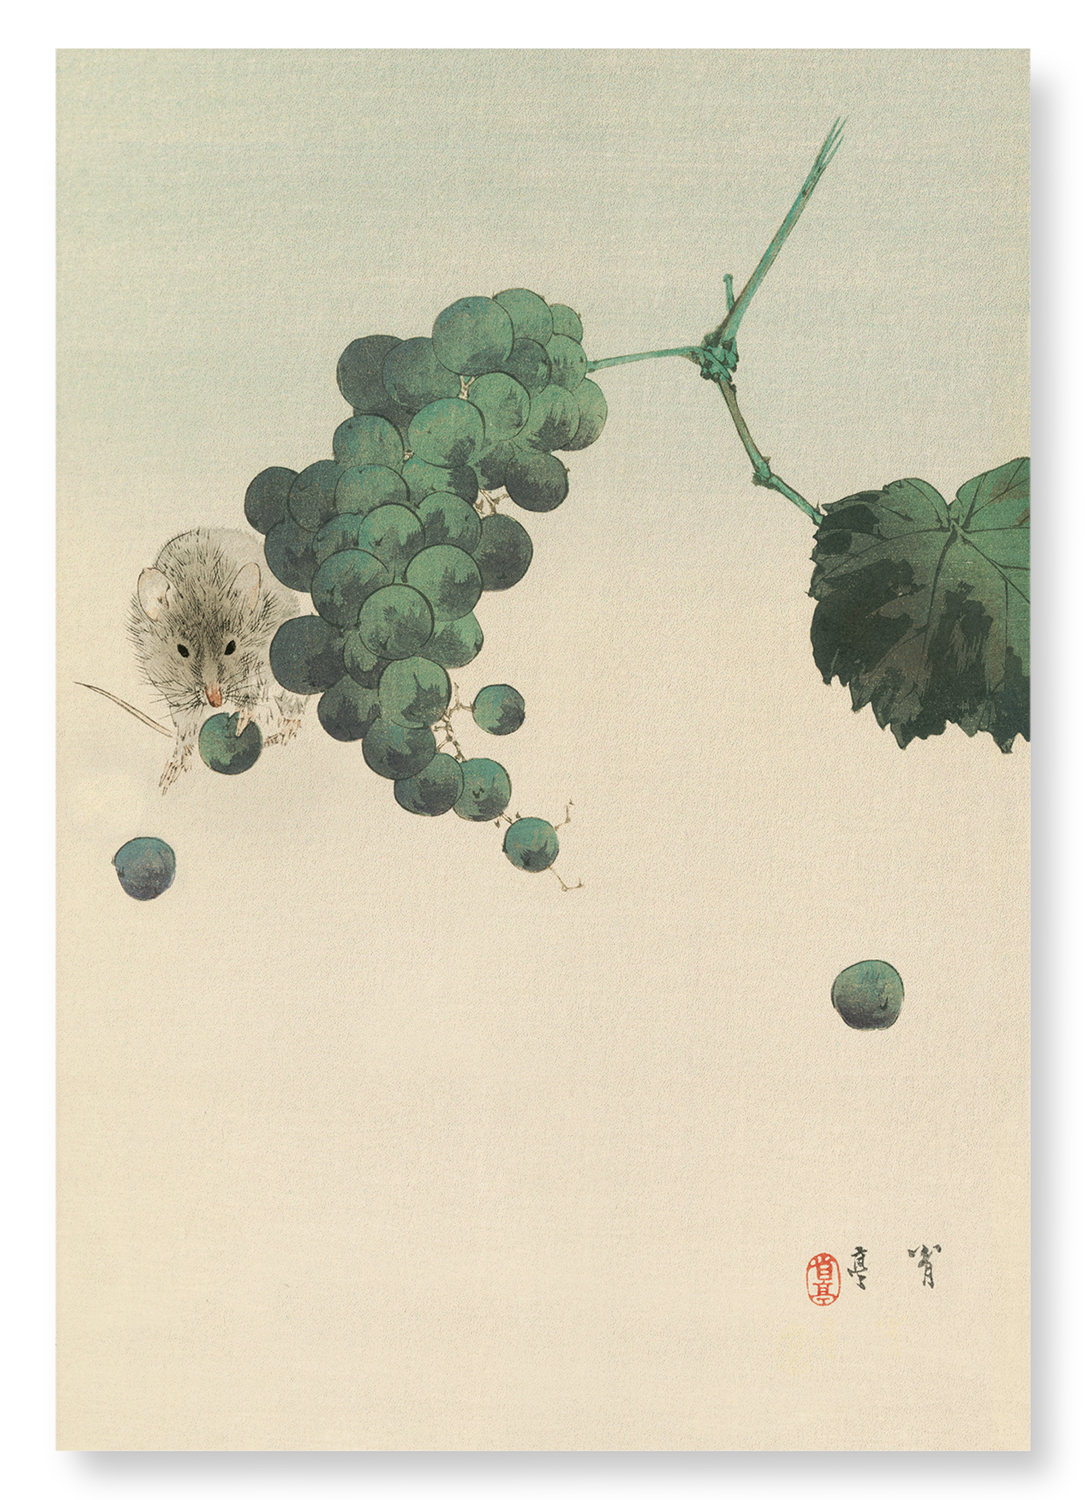 MOUSE AND GRAPES: Japanese Art Print